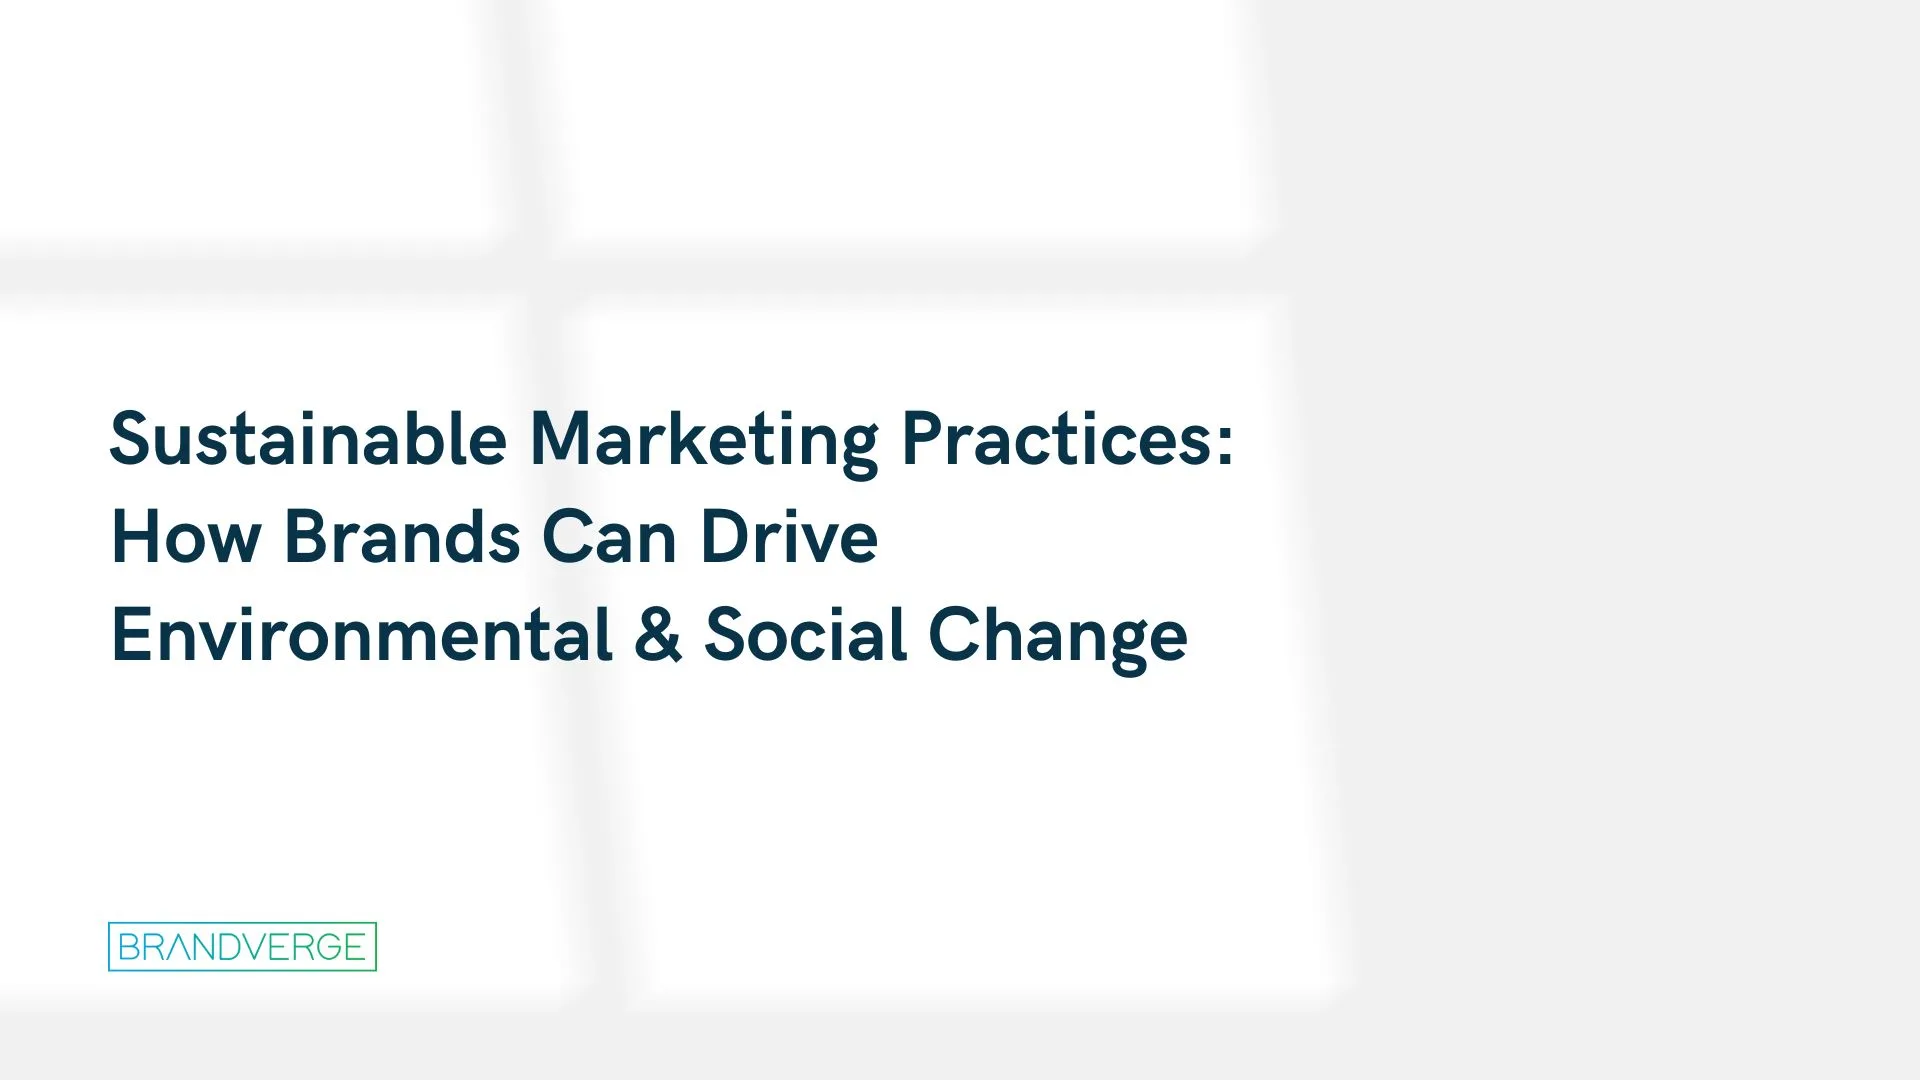 Sustainable Marketing Practices: How Brands Can Drive Environmental and Social Change